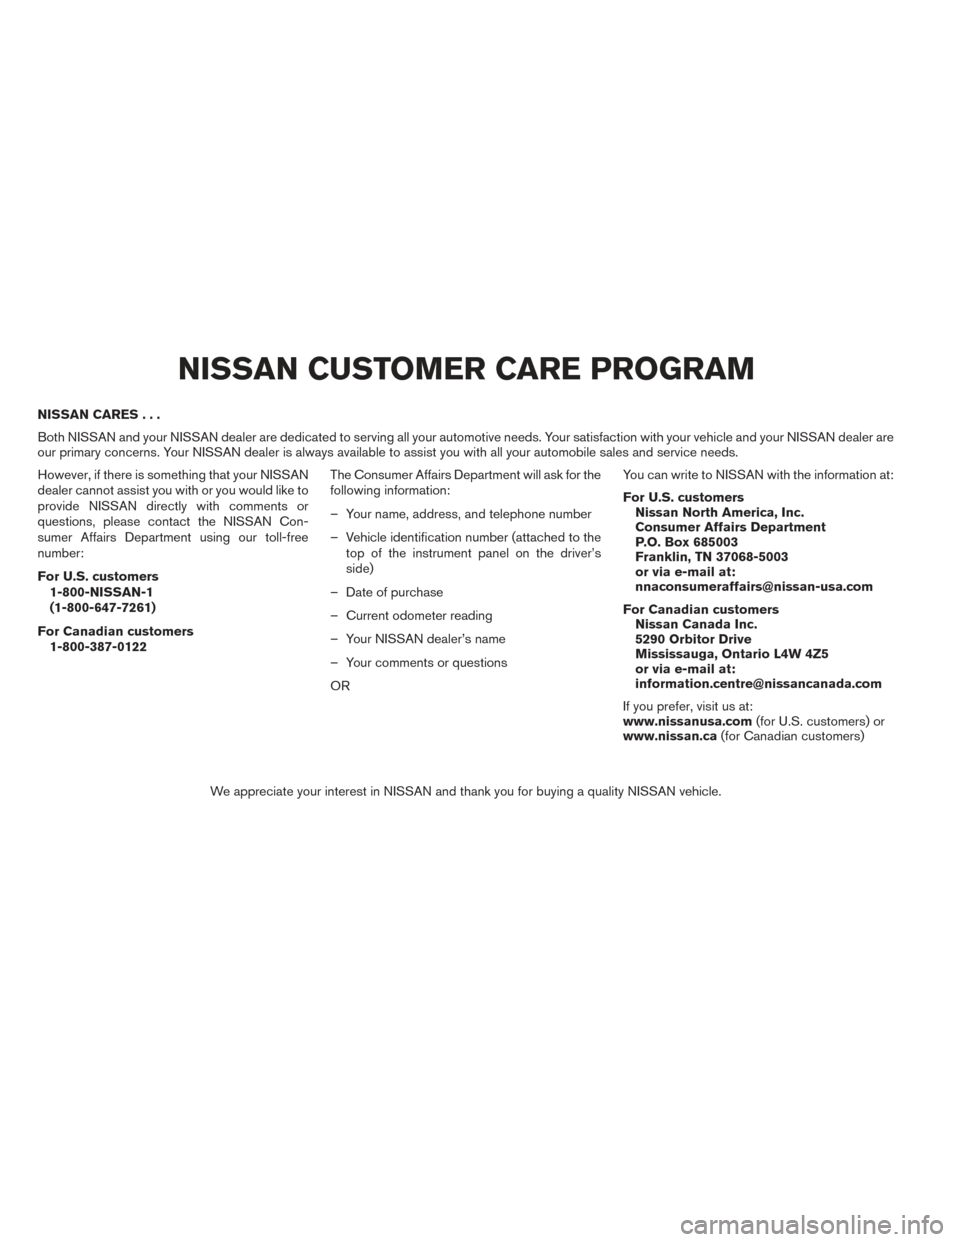 NISSAN FRONTIER 2014 D23 / 3.G Owners Manual NISSAN CARES...
Both NISSAN and your NISSAN dealer are dedicated to serving all your automotive needs. Your satisfaction with your vehicle and your NISSAN dealer are
our primary concerns. Your NISSAN 